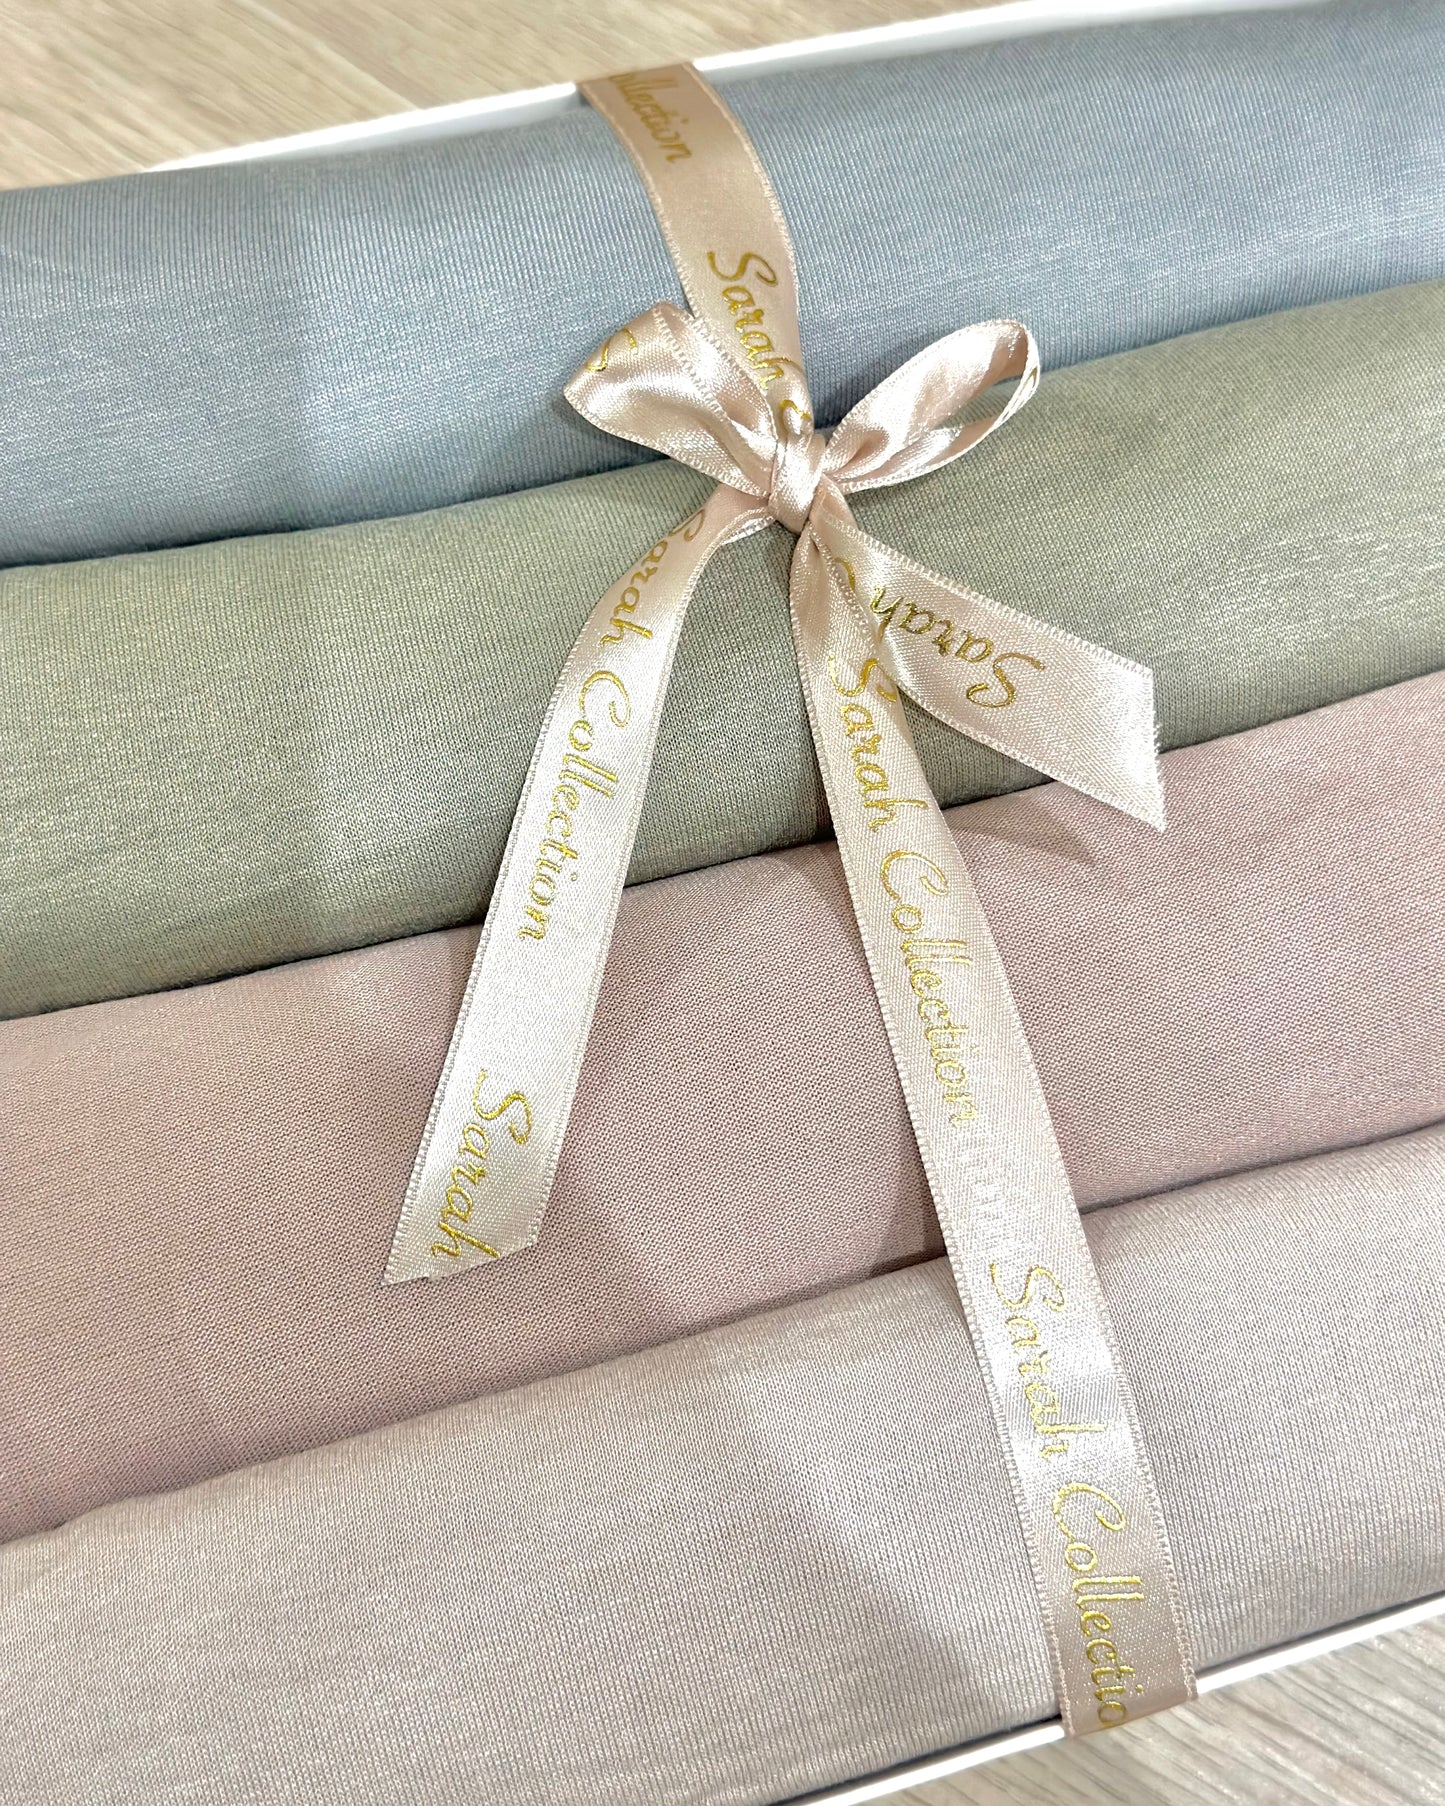 Jersey gift box with pastel colors